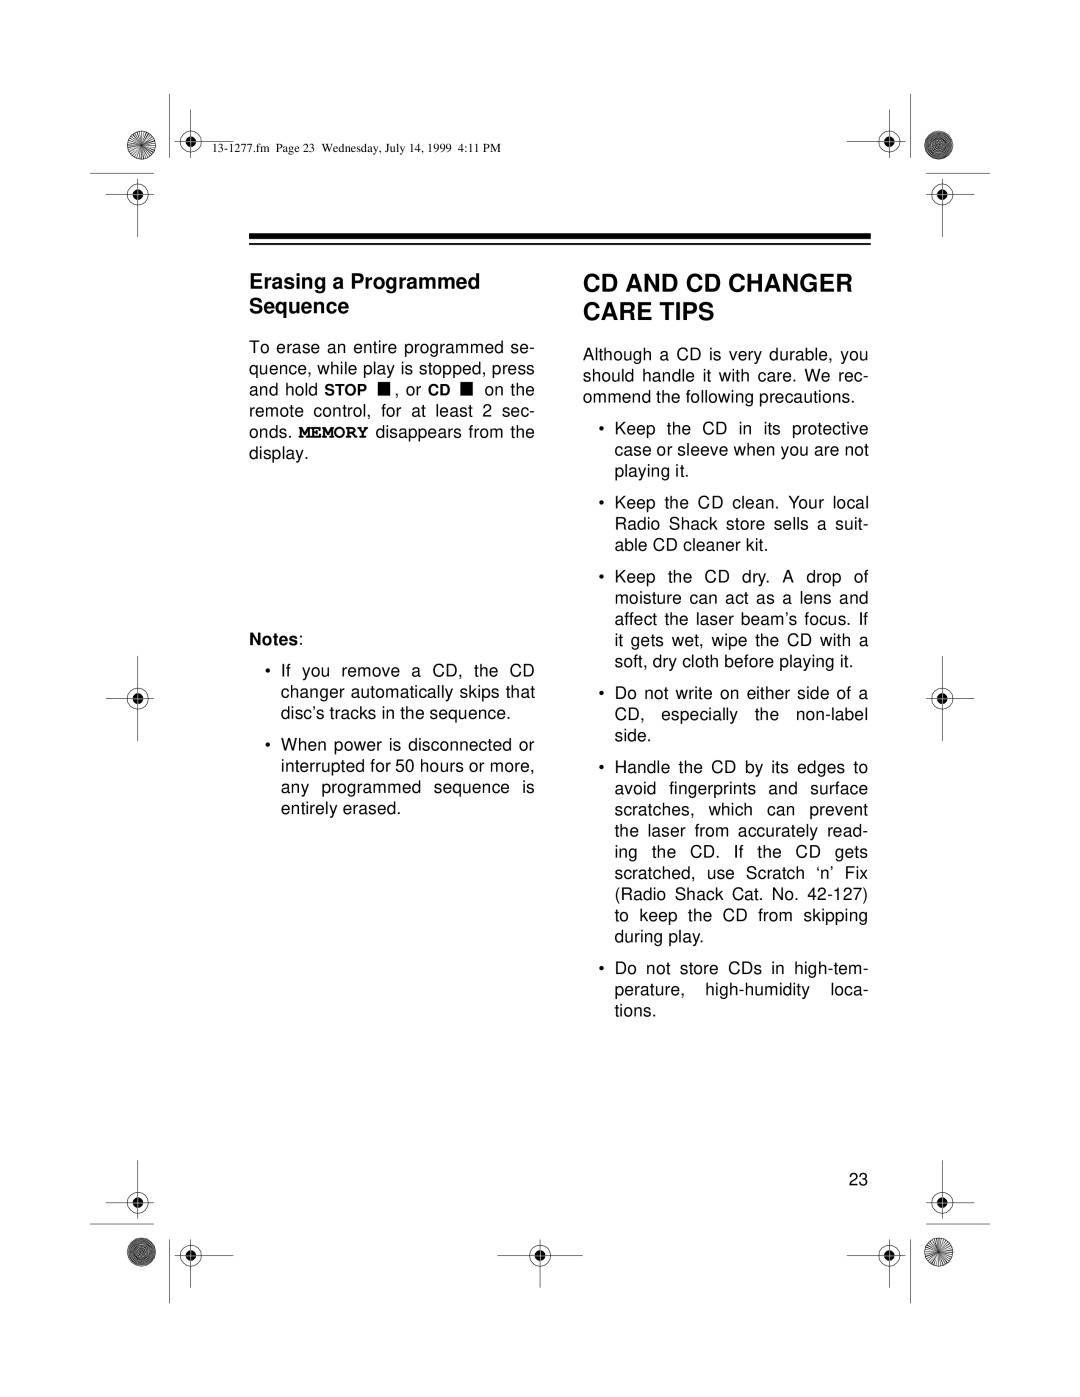 Optimus SYSTEM 730 owner manual Cd And Cd Changer Care Tips, Erasing a Programmed Sequence 